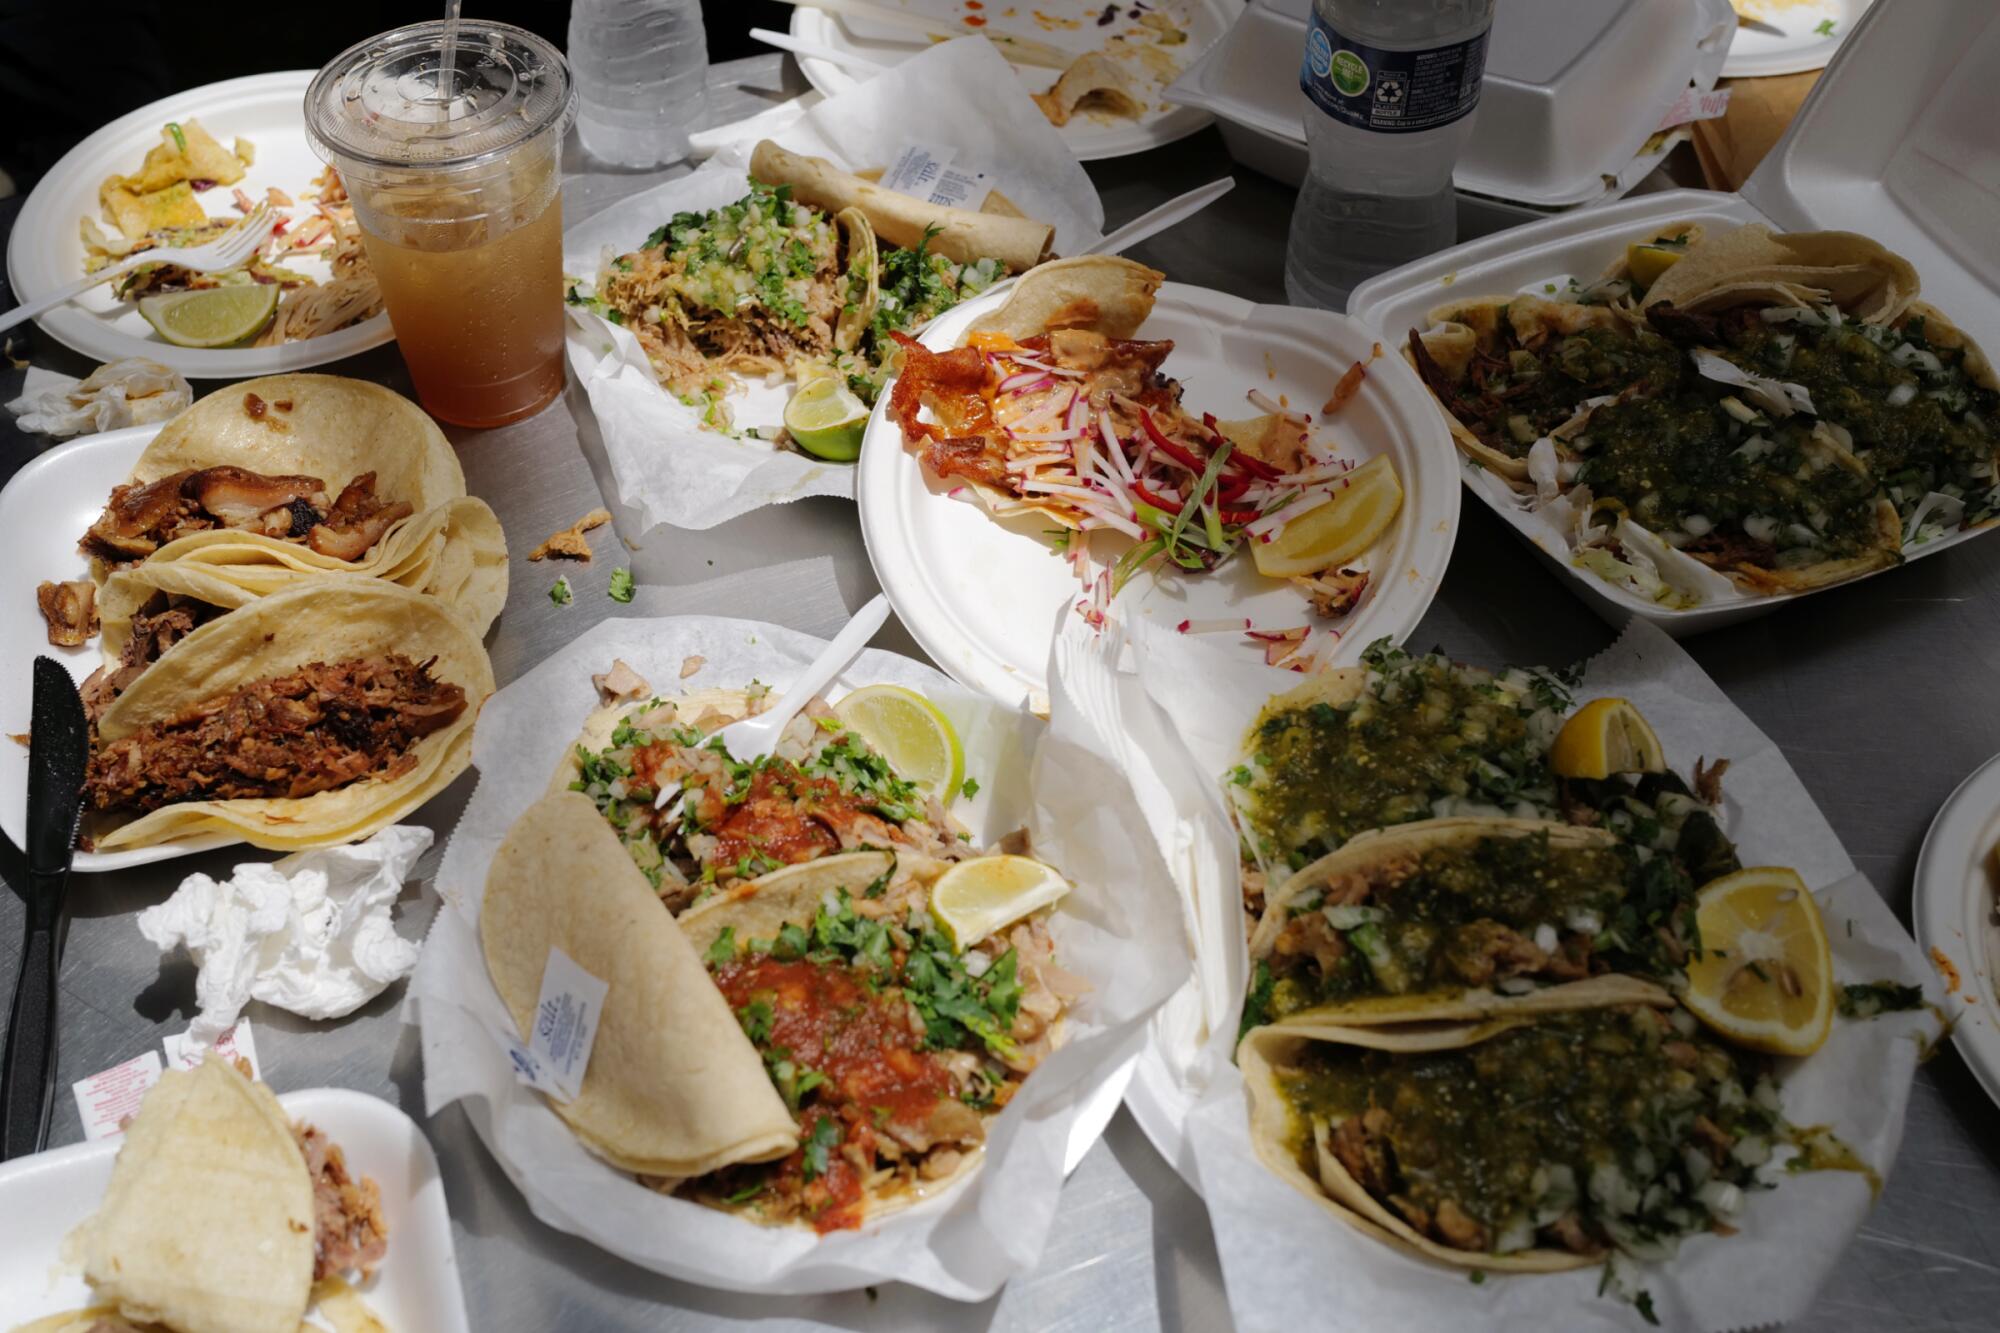 A spread of tacos from vendors at Grand Central Market.